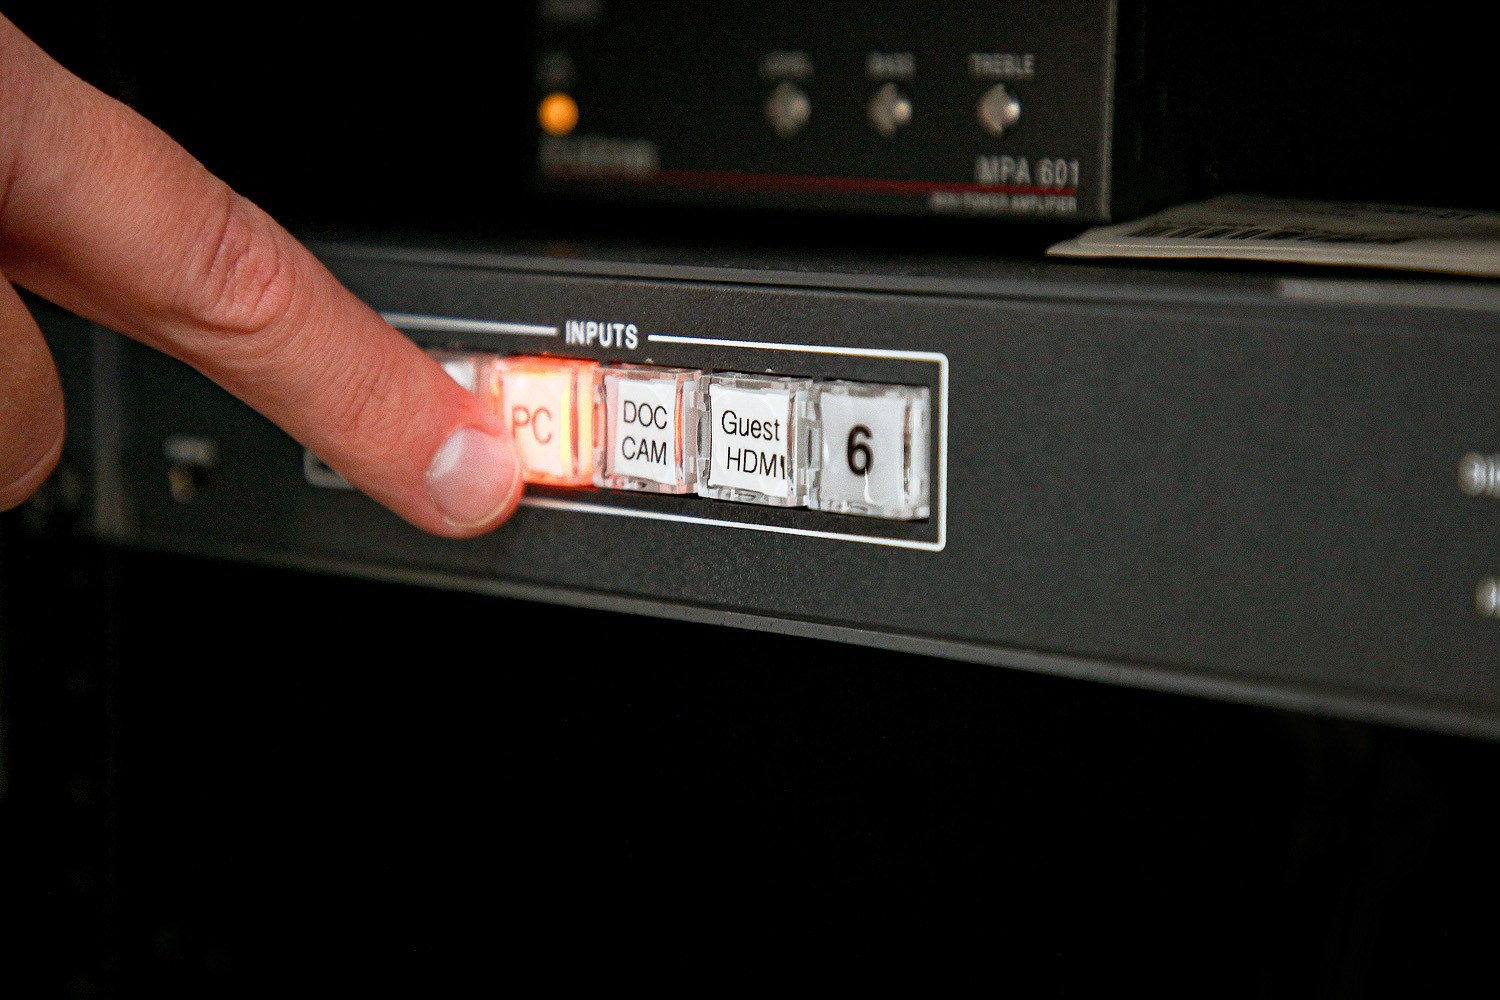 The switcher's clearly labeled buttons that light when pressed make AV source selection easy. Buttons 1 and 6 are spare inputs that allow future expansion.